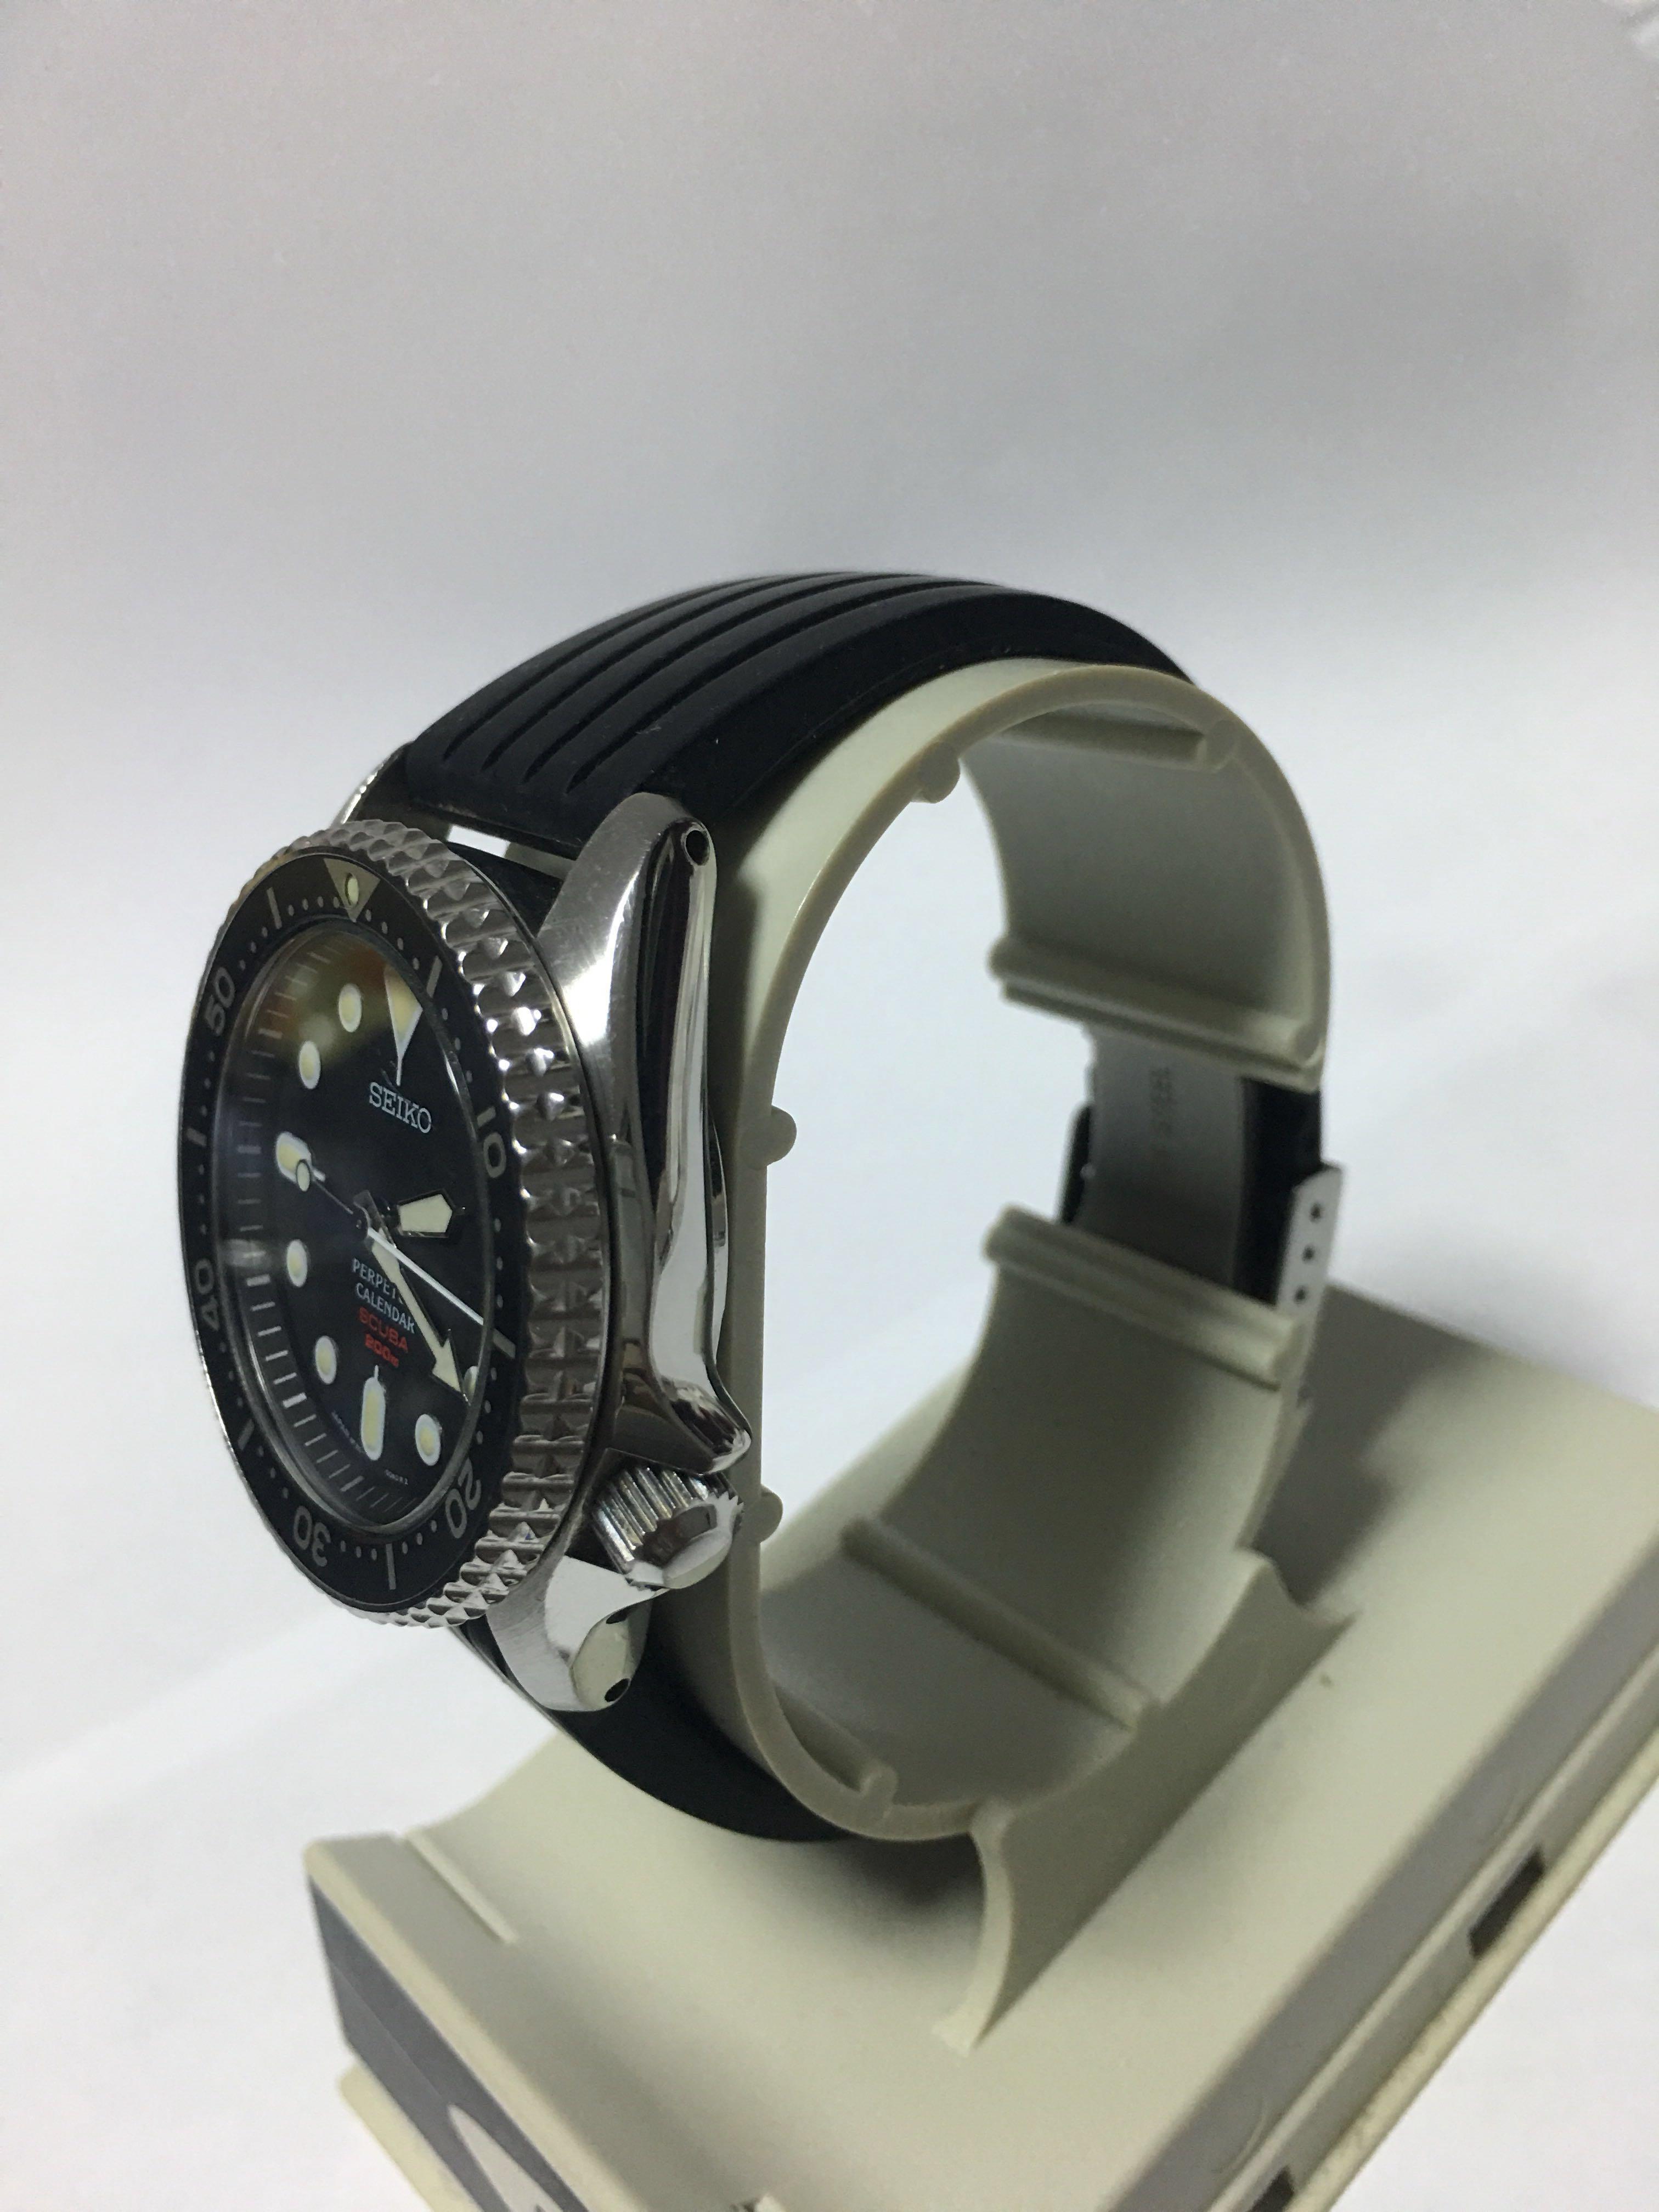 Seiko SBCM023 Perpetual Calendar Air Diver, Luxury, Watches on Carousell